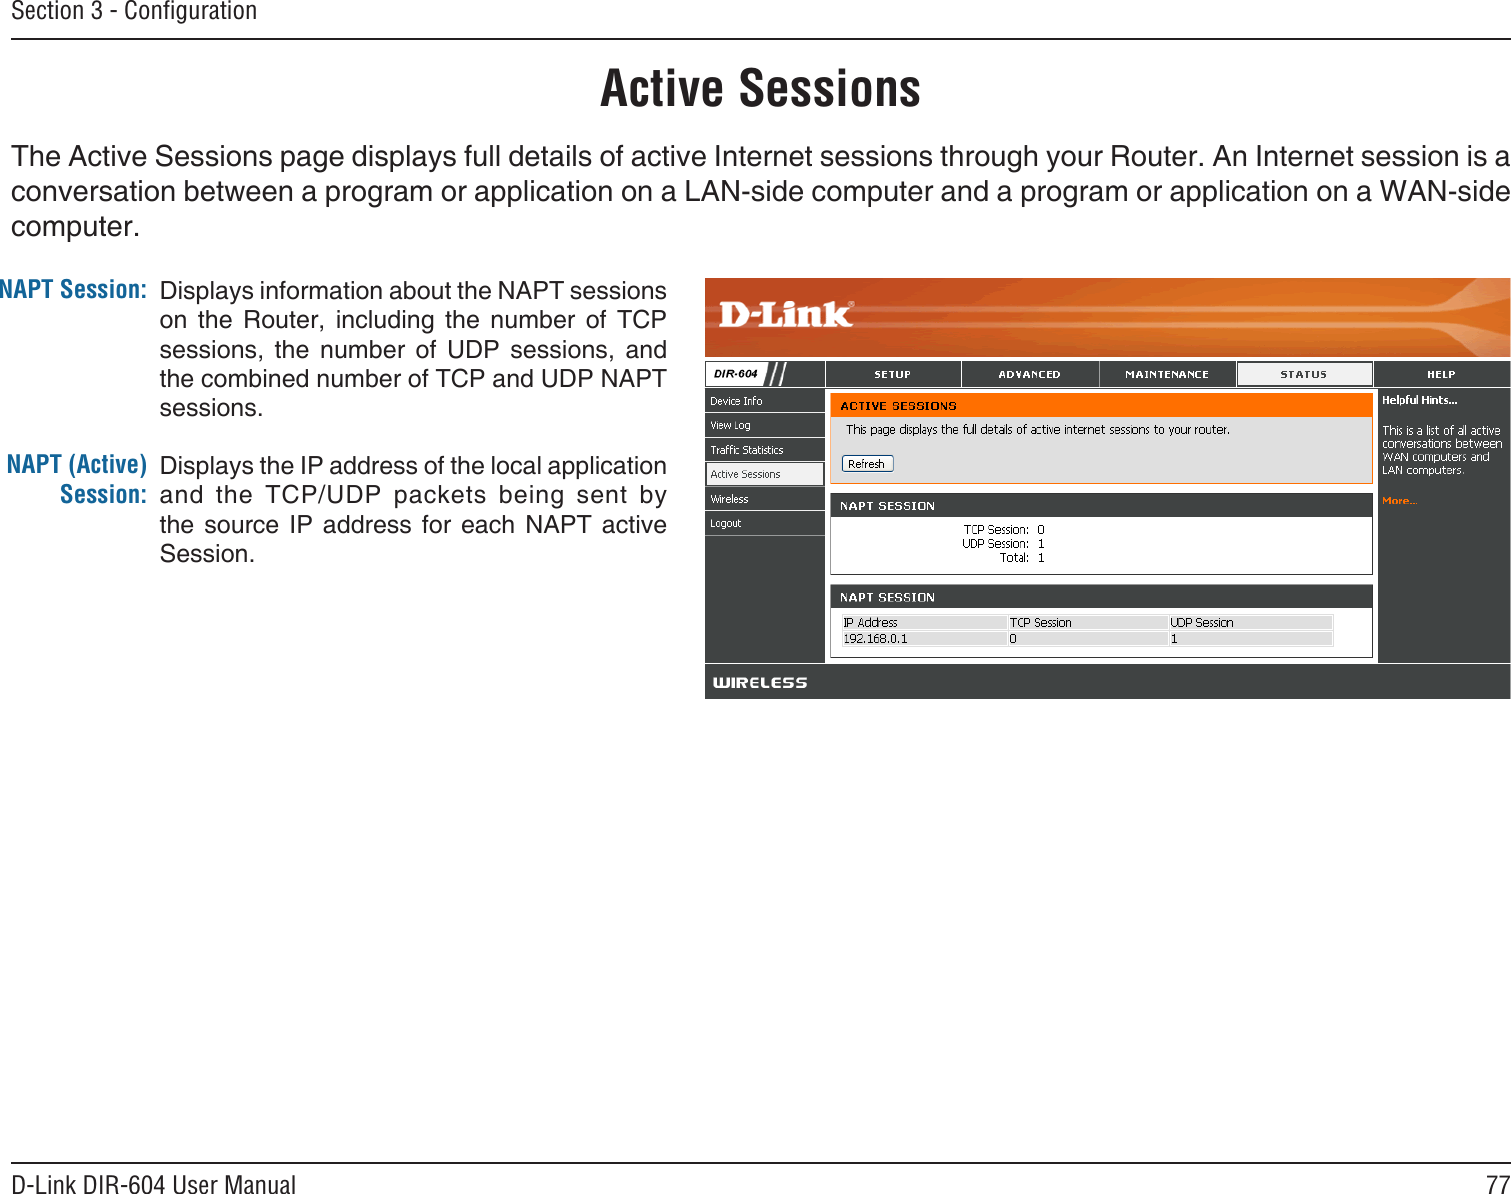 77D-Link DIR-604 User ManualSection 3 - ConﬁgurationActive SessionsThe Active Sessions page displays full details of active Internet sessions through your Router. An Internet session is a conversation between a program or application on a LAN-side computer and a program or application on a WAN-side computer. NAPT Session:NAPT (Active) Session:Displays information about the NAPT sessions on  the  Router,  including  the  number  of  TCP sessions,  the  number  of  UDP  sessions,  and the combined number of TCP and UDP NAPT sessions.Displays the IP address of the local application and  the  TCP/UDP  packets  being  sent  by the  source  IP address  for each  NAPT  active Session.